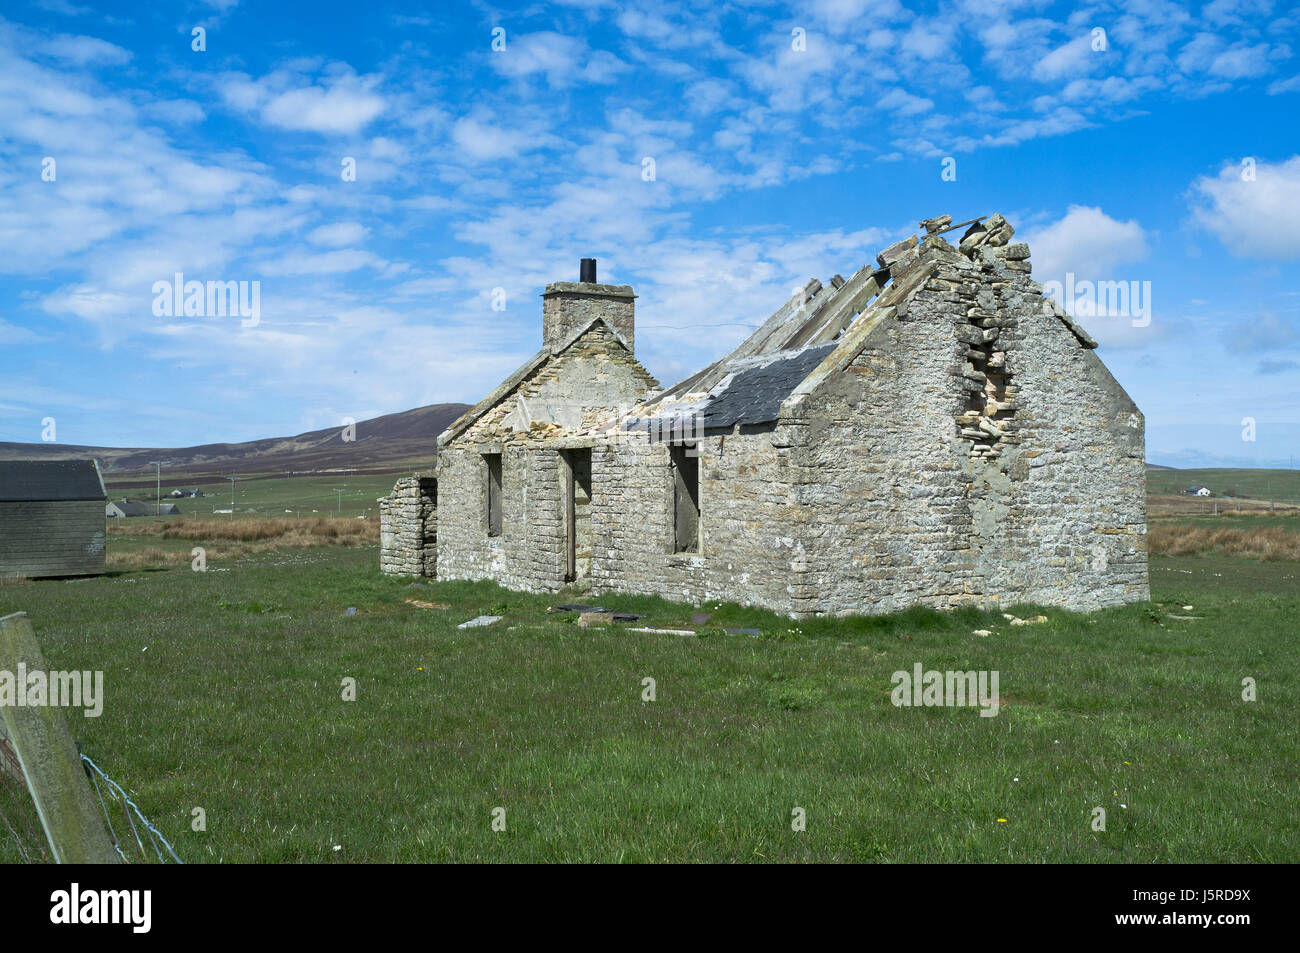 dh Ruined cottage ORPHIR ORKNEY Derelict building ruins crumbling ruin derilict Stock Photo